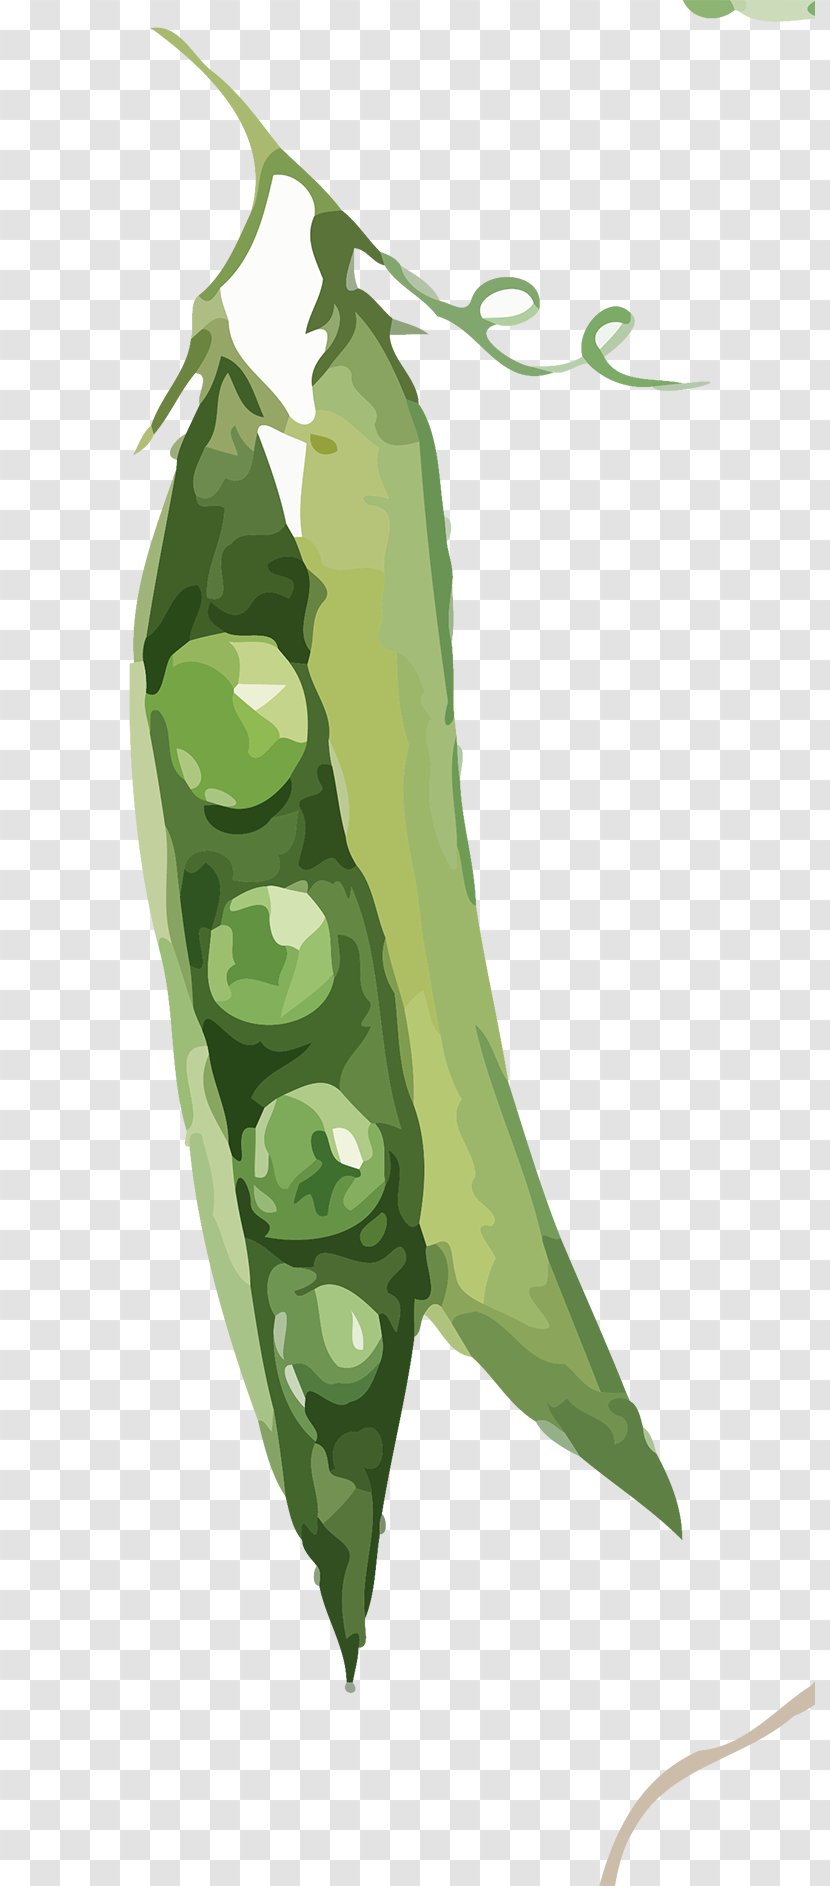 Pea Soup Green Bean Vegetable - Leaf - Hand-painted Eggplant Transparent PNG